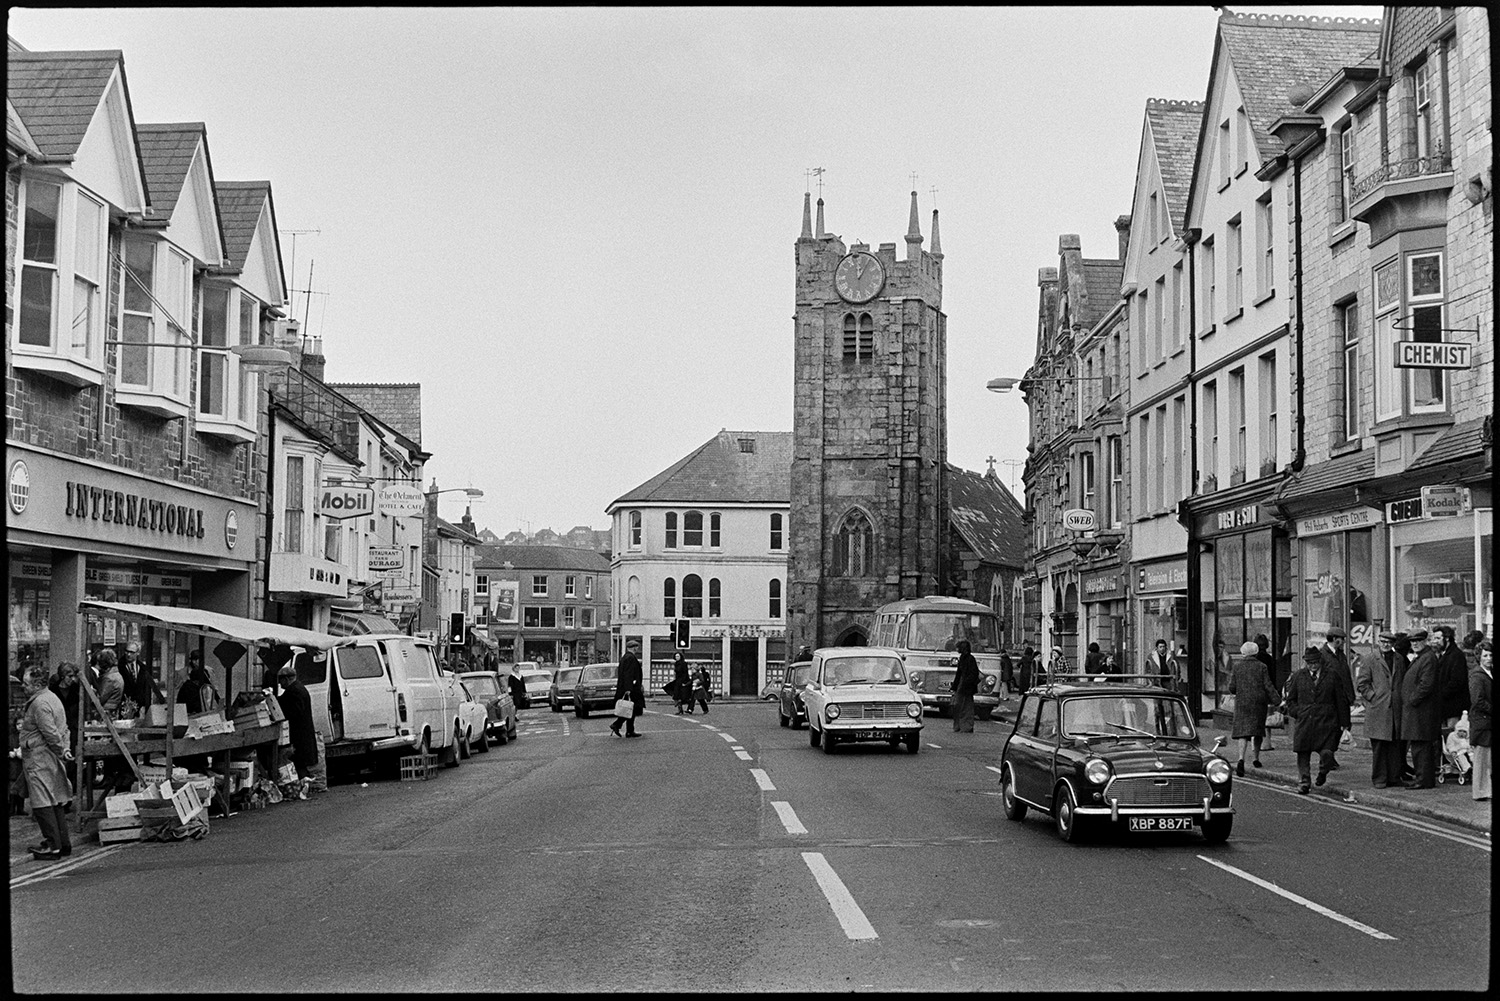 Town centre with cars, taken to compare with old photos. 
[The town centre of Okehampton with church tower and shops. Shop fronts include the International Stores, Chemist and Gordon Vick & Partners, estate agents. People can also be seen shopping at a market stall on the side of the street.]